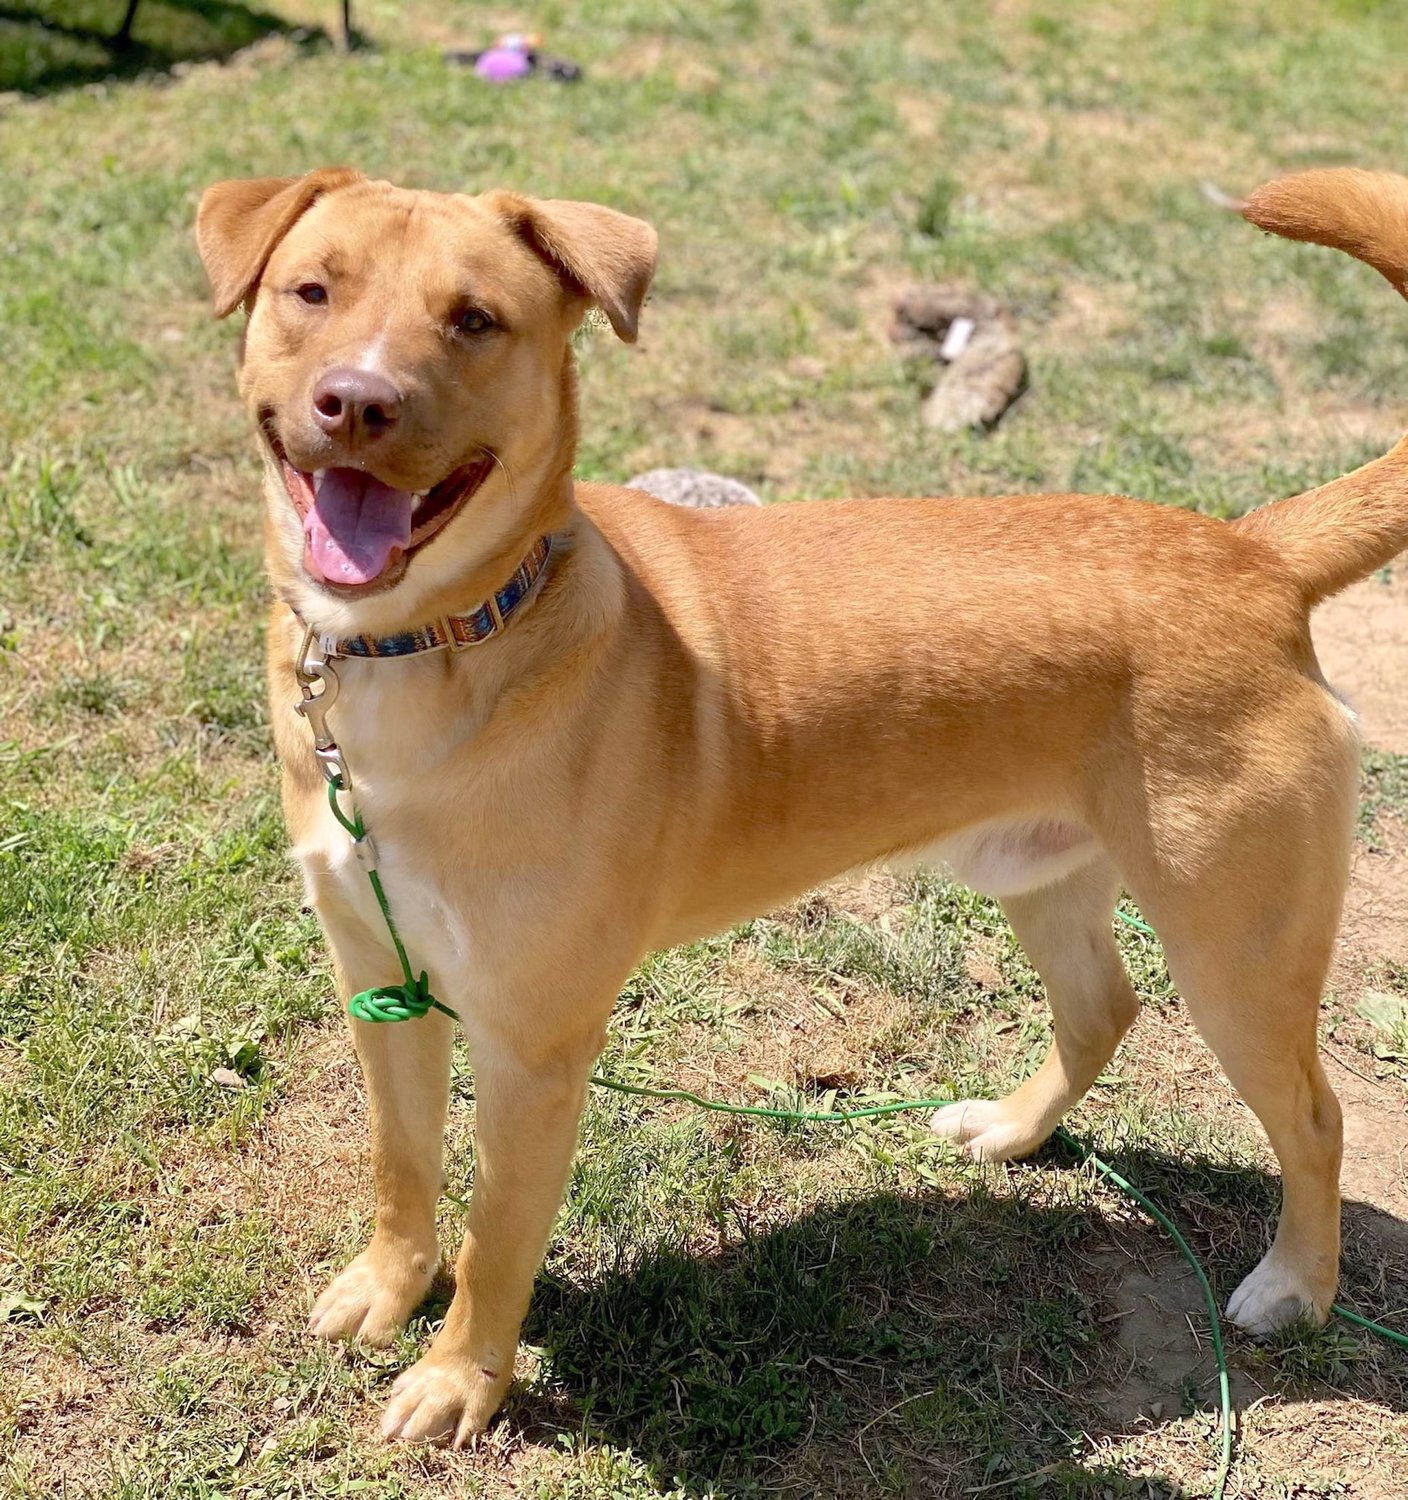 This handsome and happy guy is a 2-year-old pitbull/lab mix called Whiskey. He really wants to be the best companion to someone and is searching for that perfect home. He has a lot of potential, but he definitely needs a home that offers him structure, boundaries and of course a lot of room where he can run and play! He loves playing with rope toys and tennis balls. This energetic guy will keep you busy and always entertained! He prefers to be the only pet in a home, so he can receive all of the love and attention. To visit Whiskey, stop by the Humane Society of Rome, 6247 Lamphear Road, call 315-336-7070 or go to www.humanesocietyrome.com.